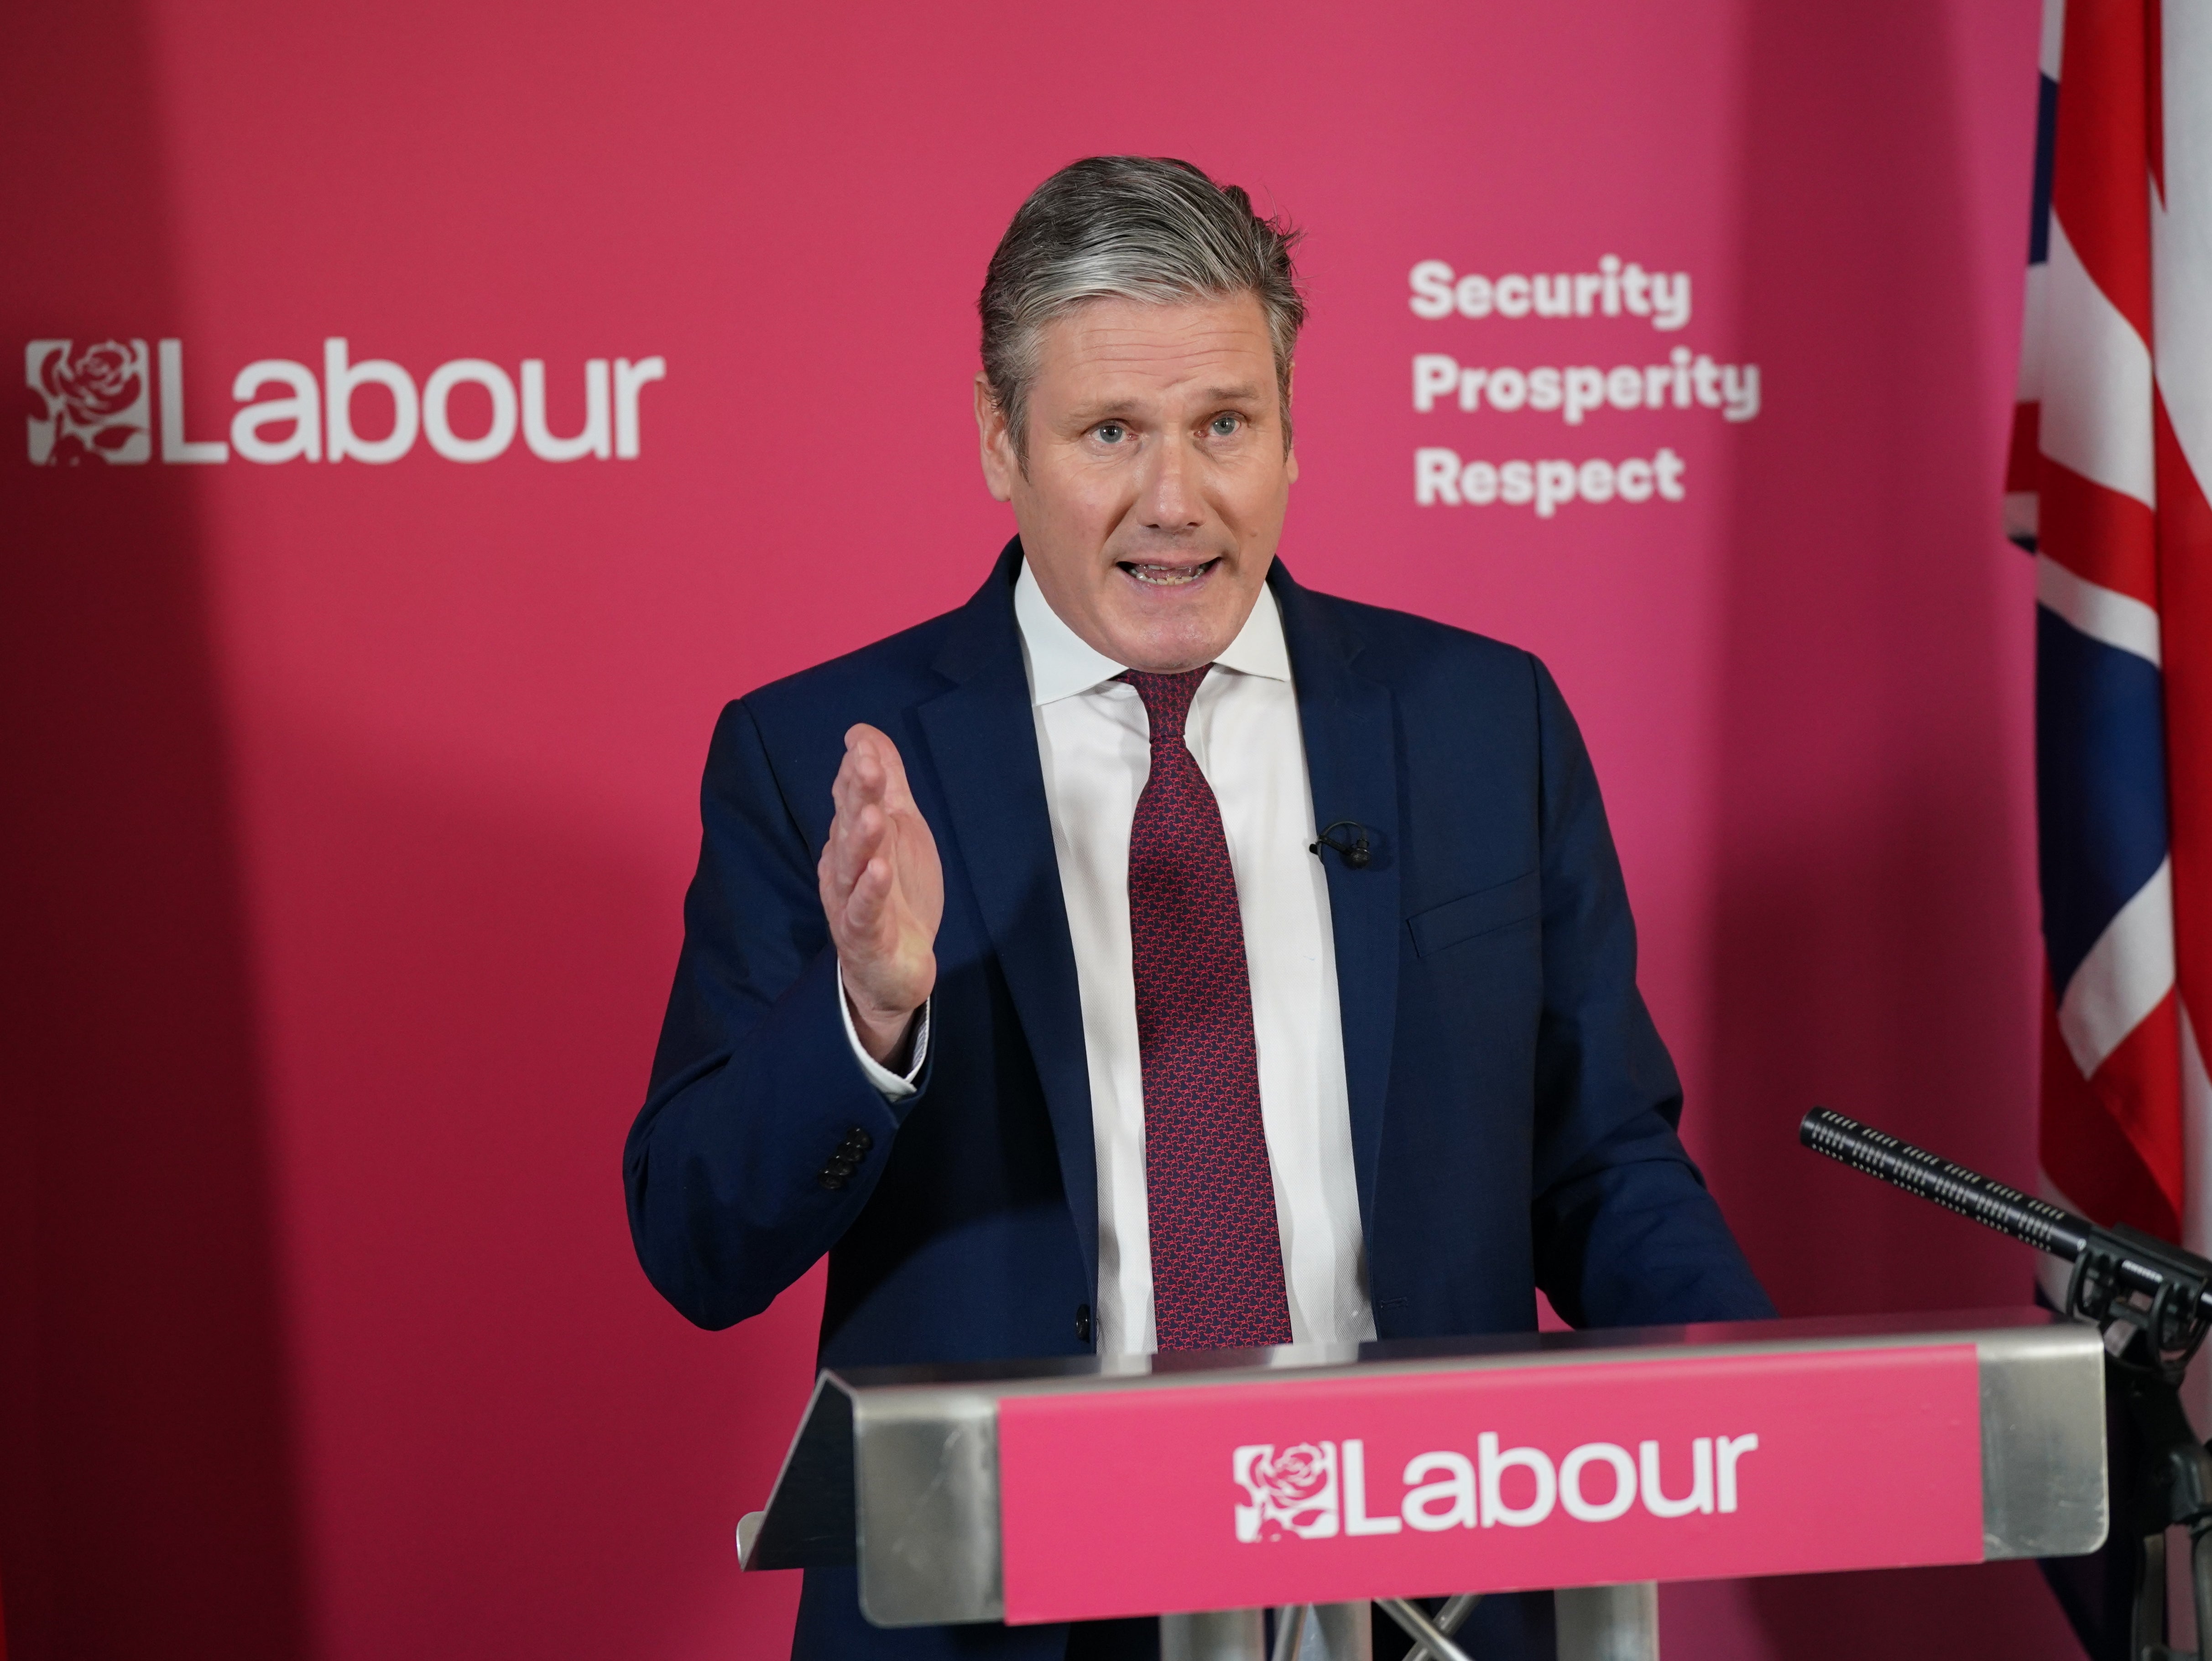 Sir Keir Starmer makes a statement at Labour Party headquarters in London (Yui Mok/PA)